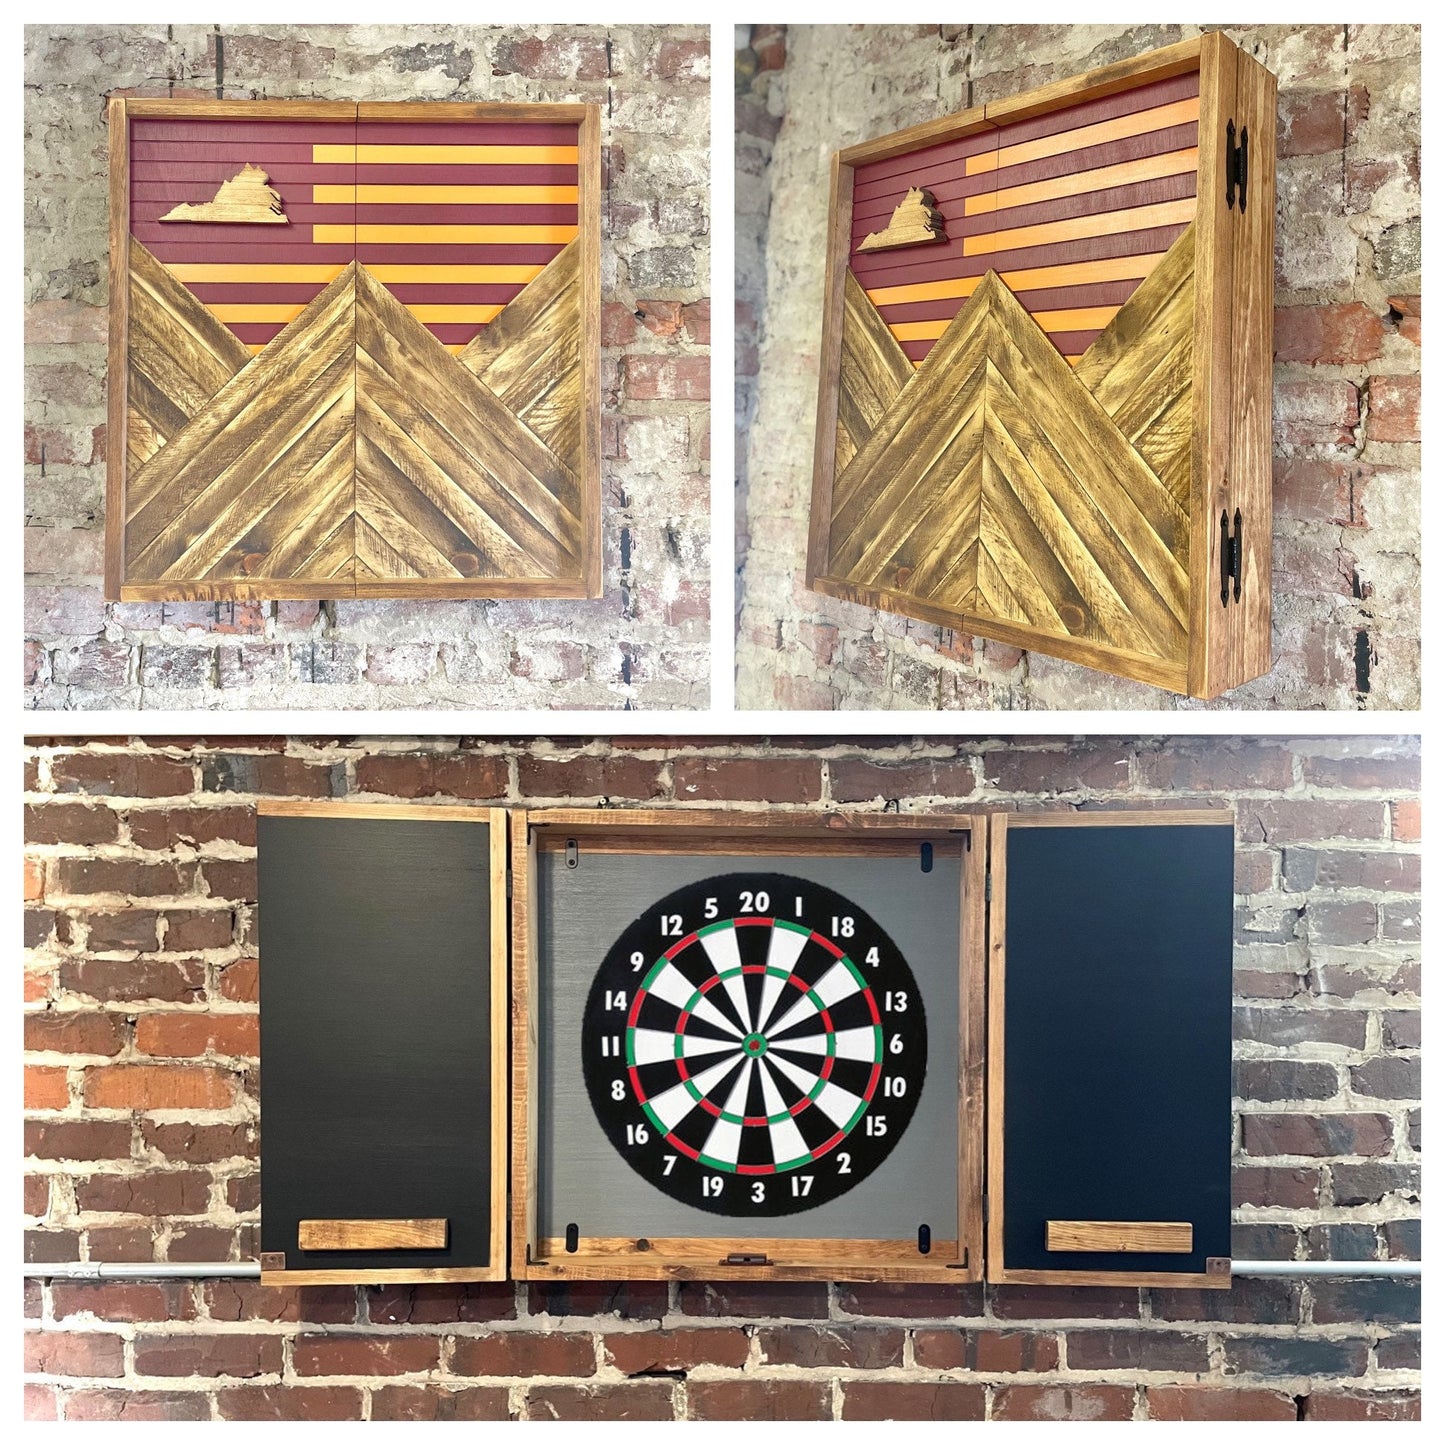 Rustic Dartboard Cabinet - Rustic West Virginia Mountaineer Flag - Rustic Cabinet - 24”x24” - Game Room / Man Cave Art - Home/ Wall Décor